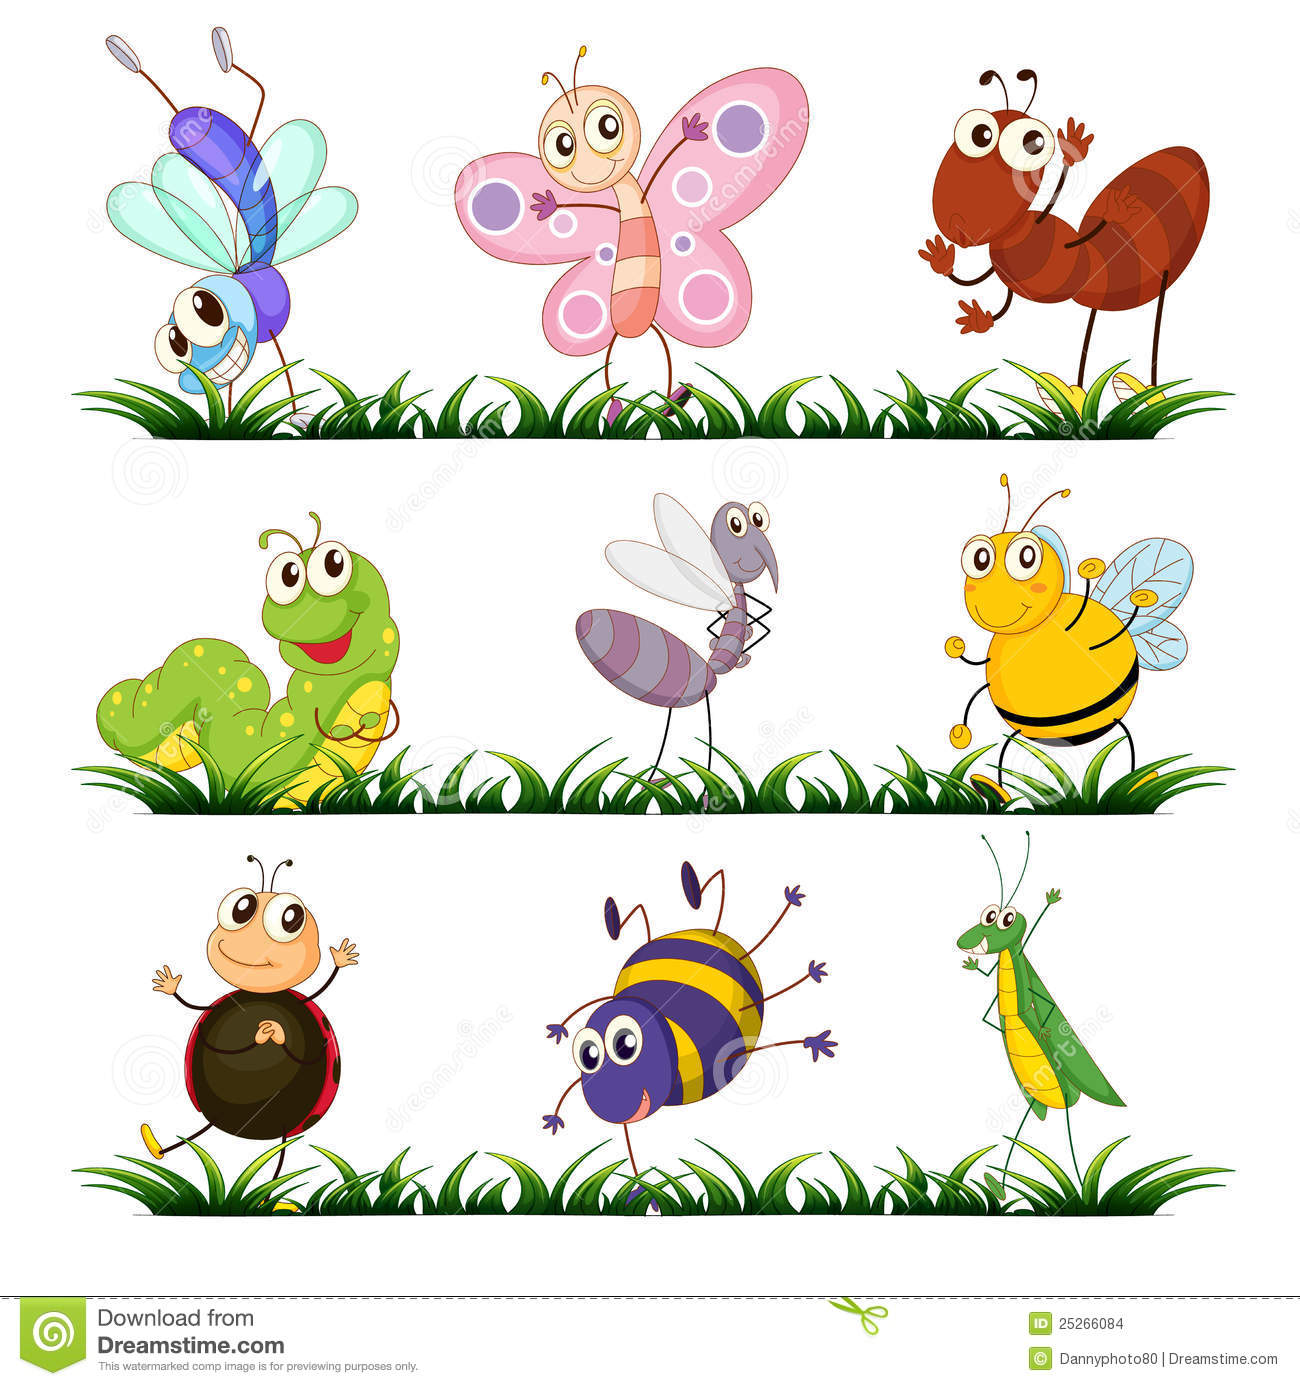 Clipart of insects - ClipartF